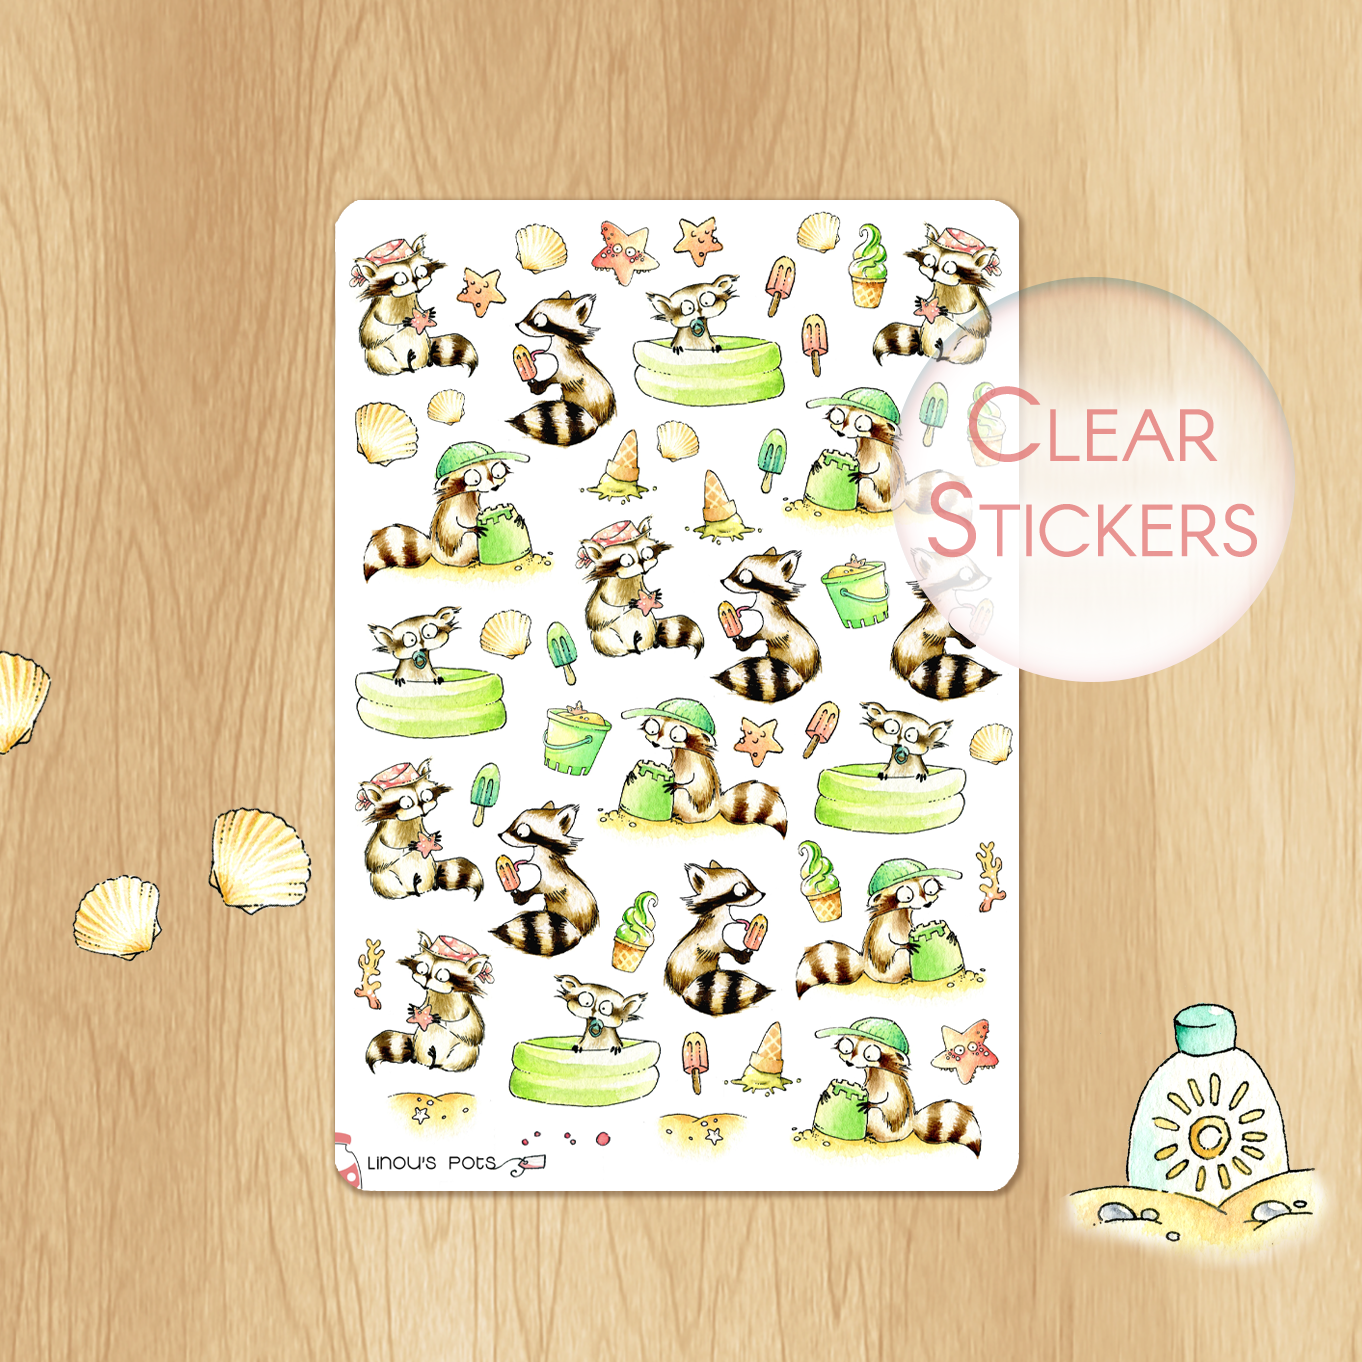 Playing In The Sand - Decorative Watercolor Stickers - Raccoons at the Beach